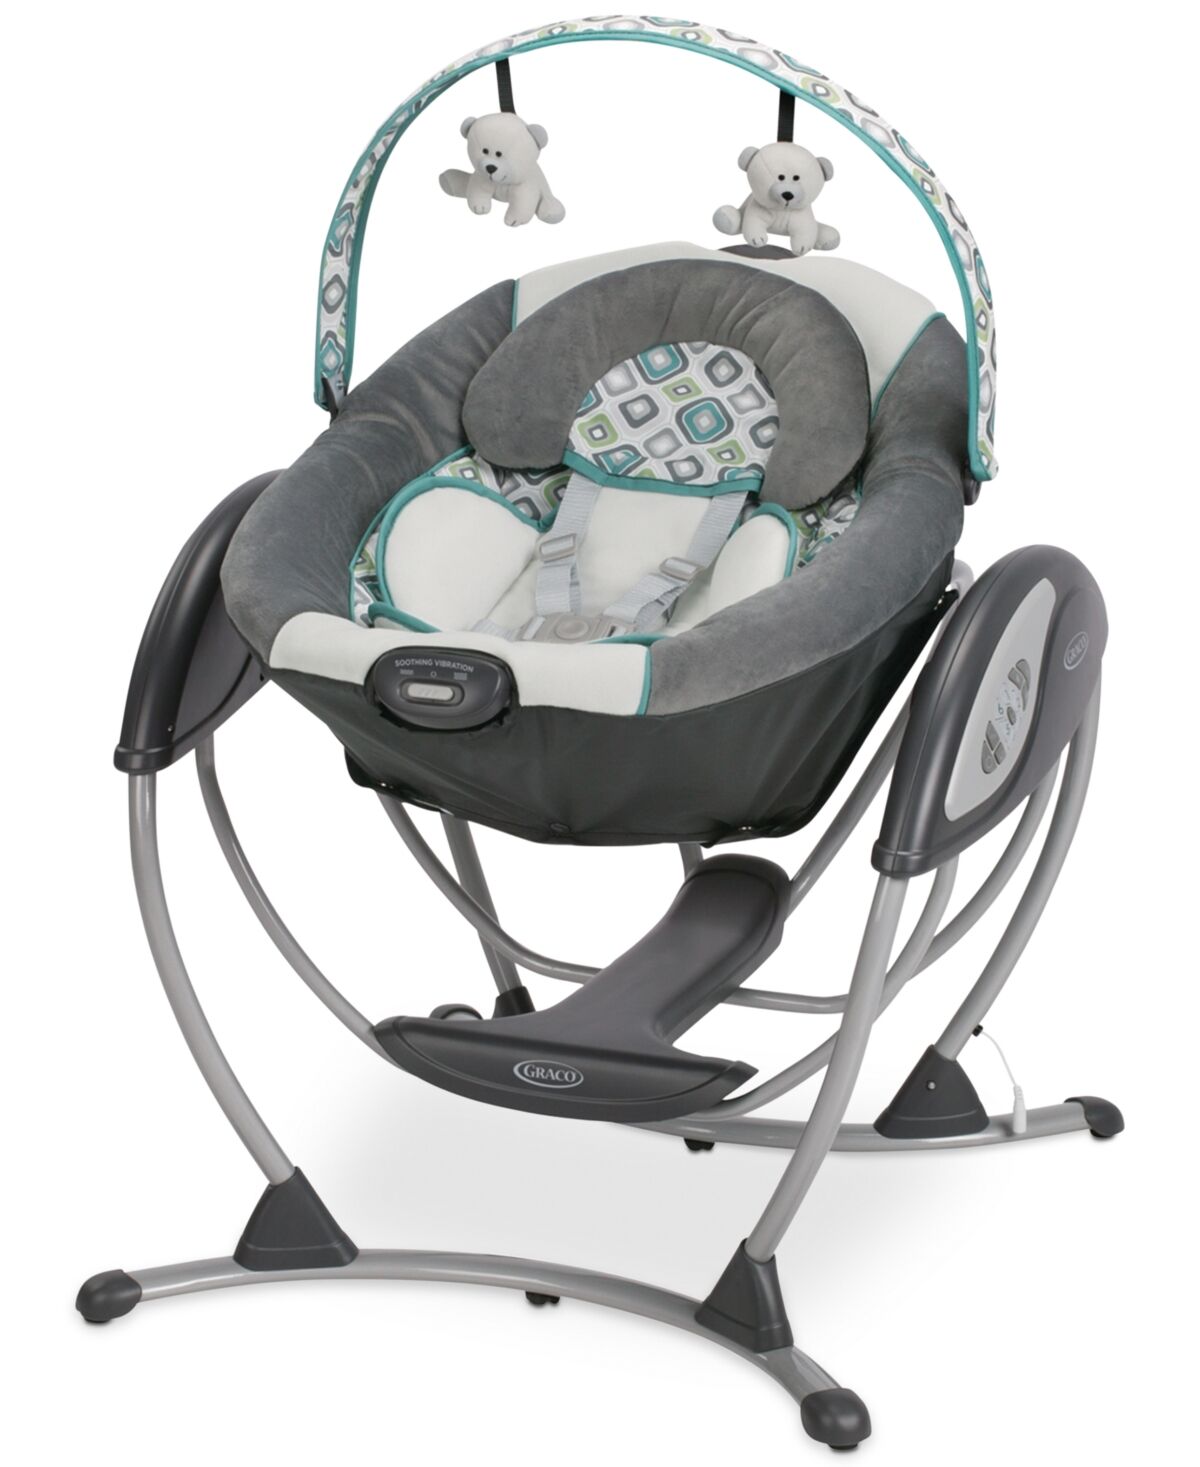 Graco Baby Swinging Glider Lxp Affini Chair - Affina